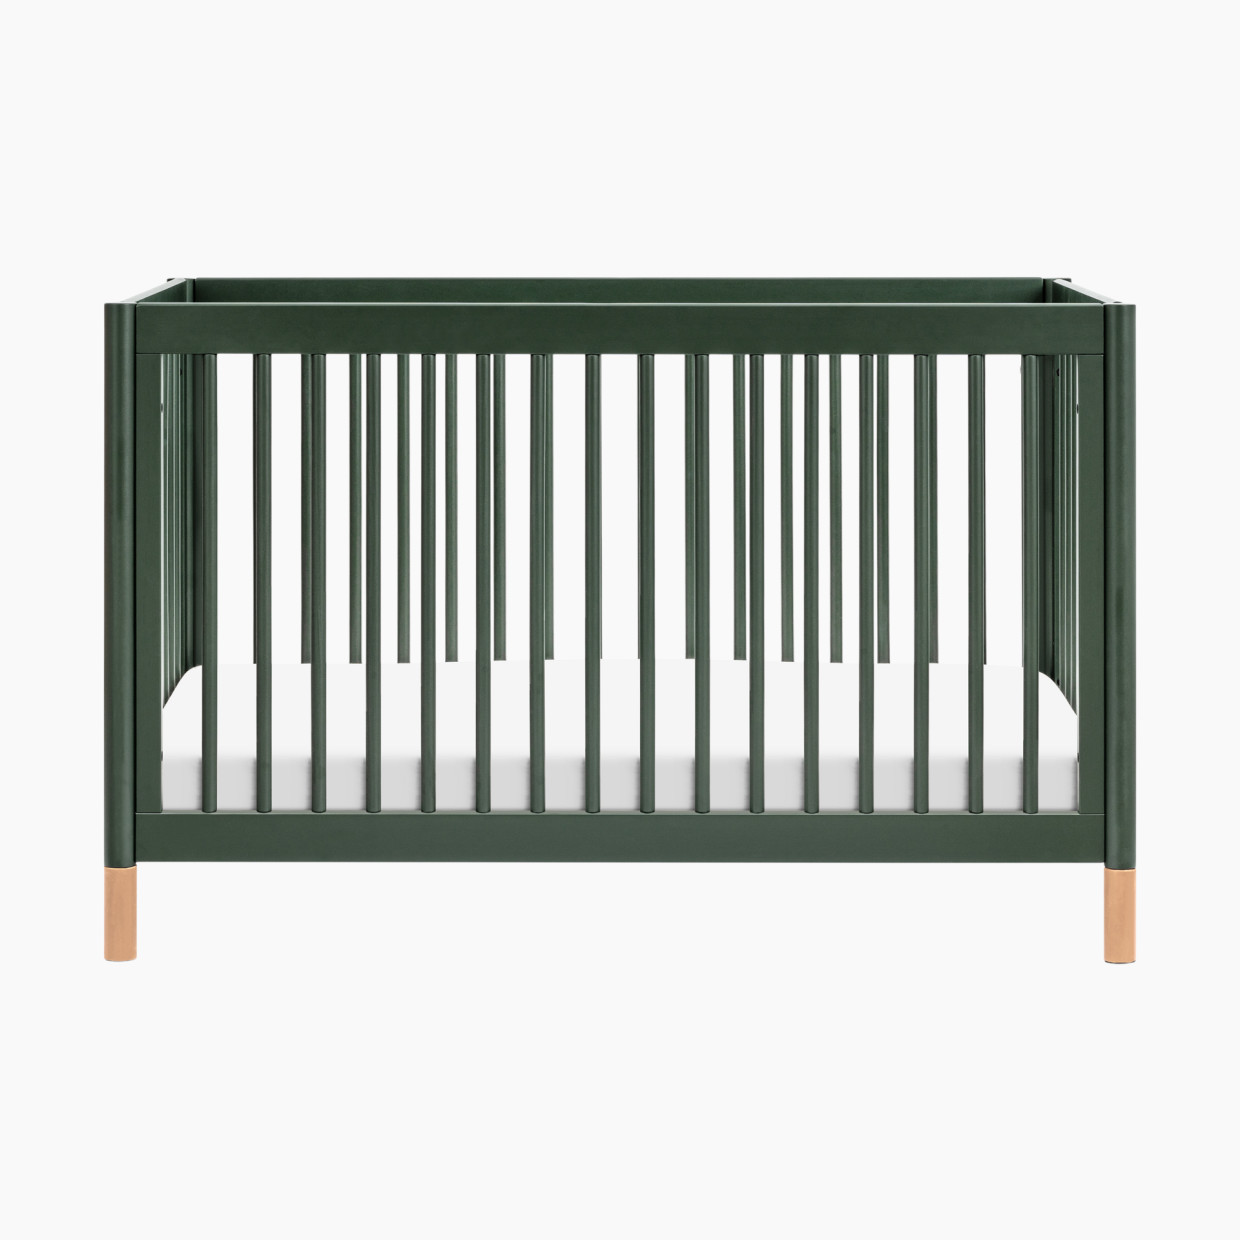 babyletto Gelato 4-in-1 Convertible Crib with Toddler Bed Conversion Kit - Forest Green With Vegan Blonde Leather Feet.